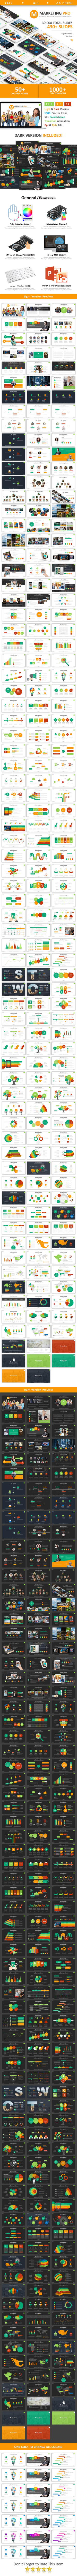 GraphicRiver Marketing Pro Powerpoint 20868665